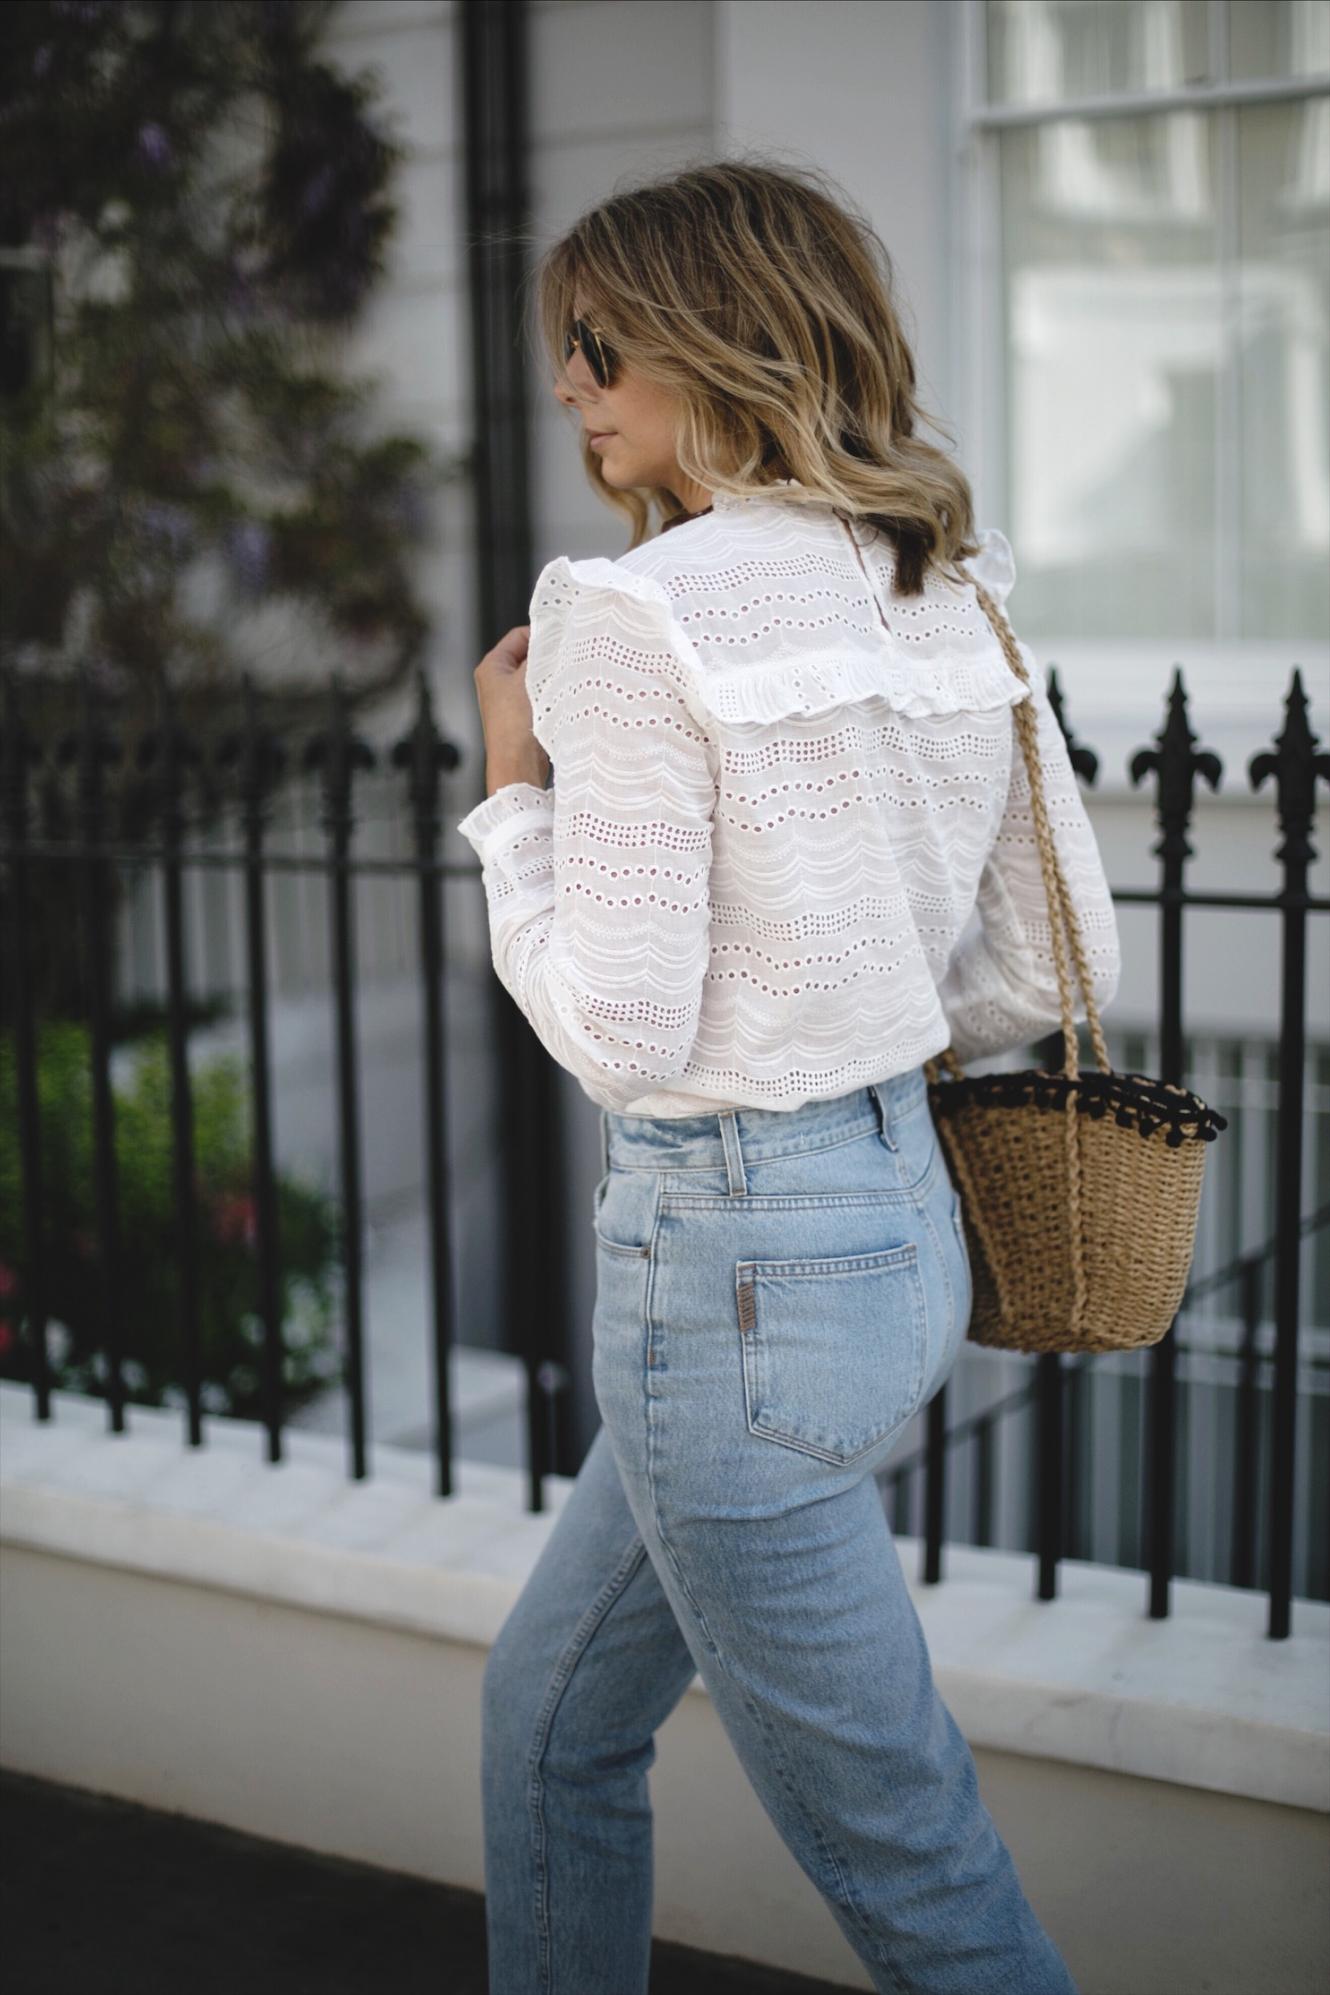 Emma Hill wears cream broderie anglais blouse, bleach wash high waisted jeans, straw basket bag with pom poms